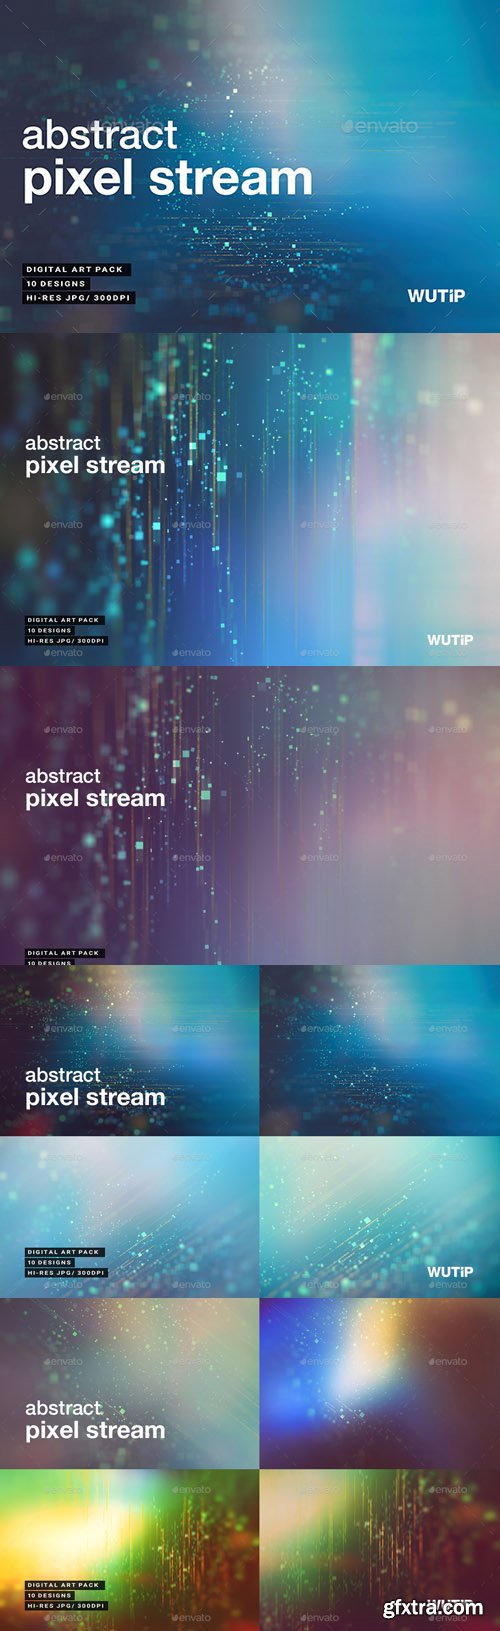 GR - Abstract Pixel Stream Backgrounds 20664162